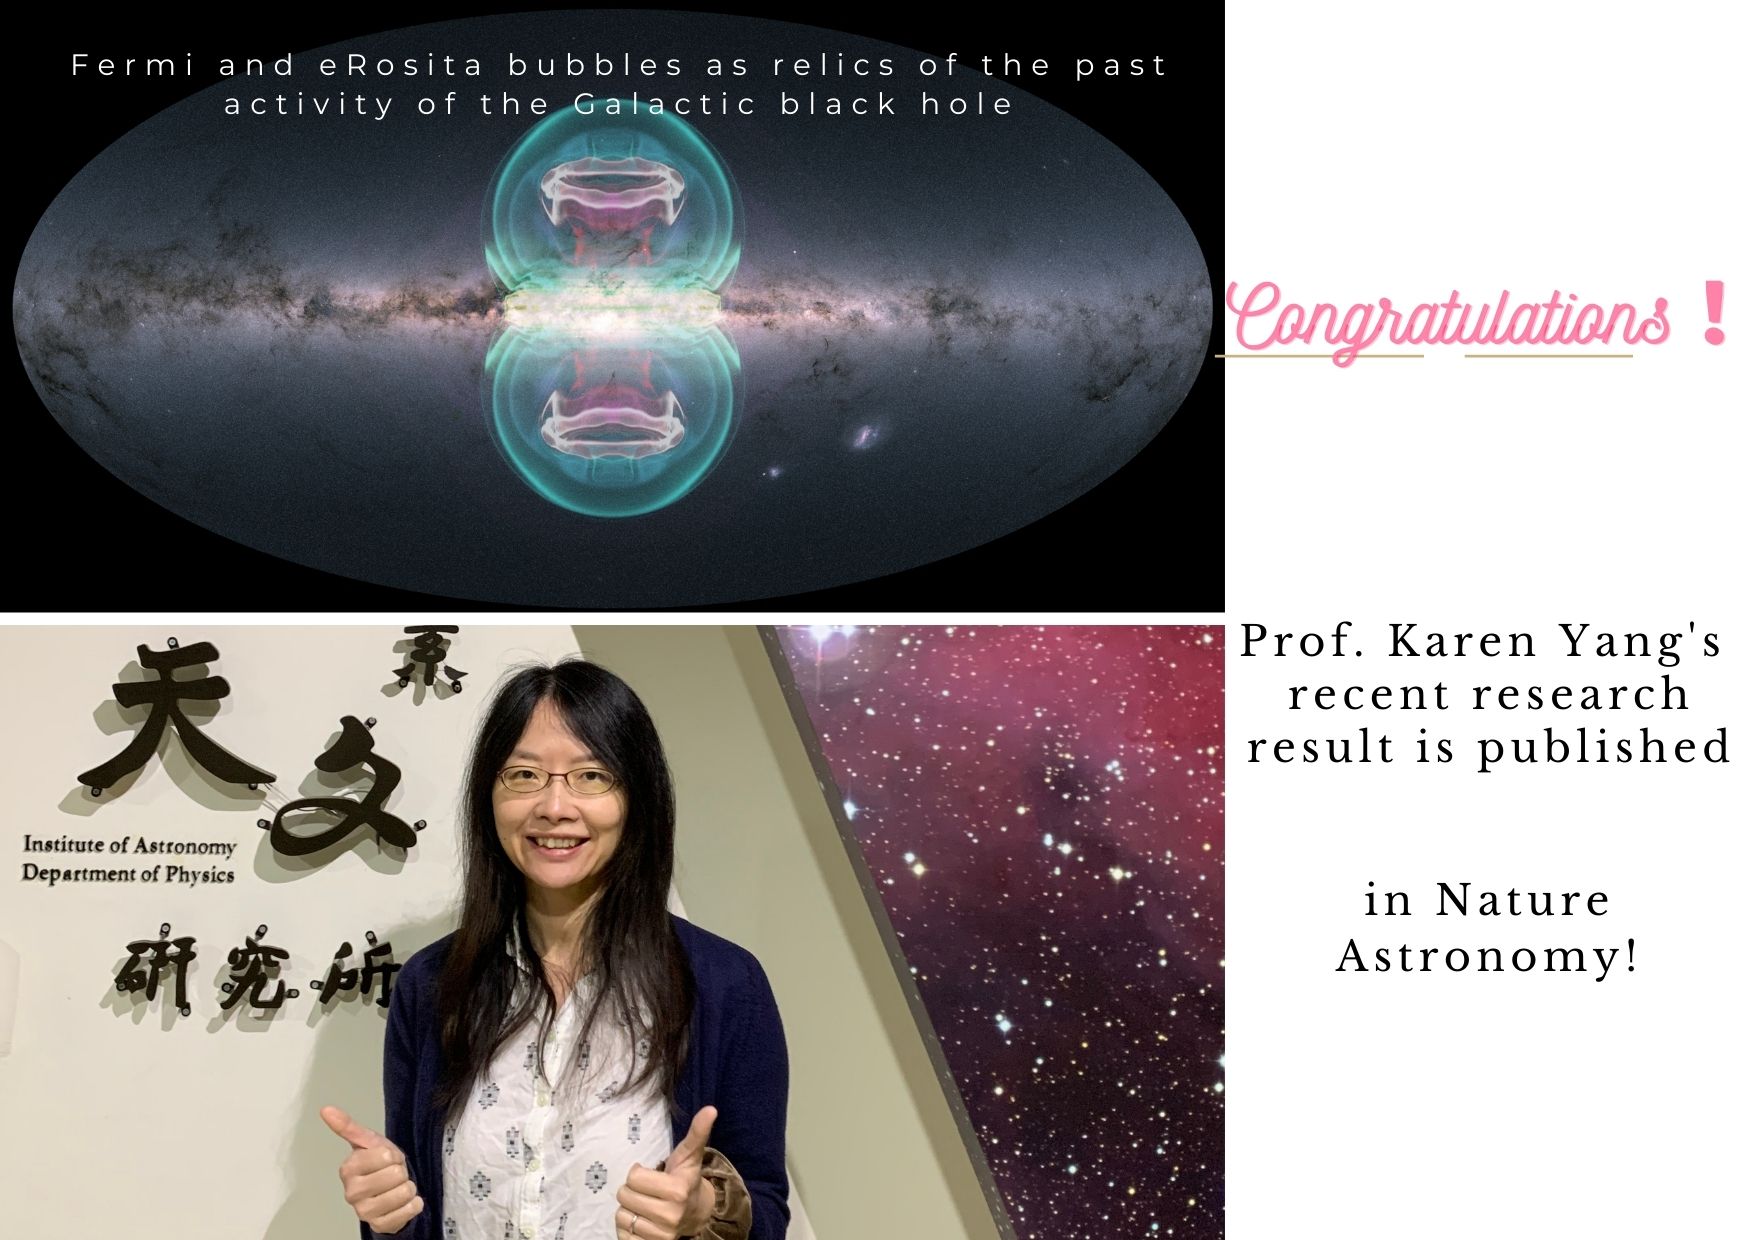 Congratulation! Prof. Karen Yang's recent research is published in Nature Astronomy